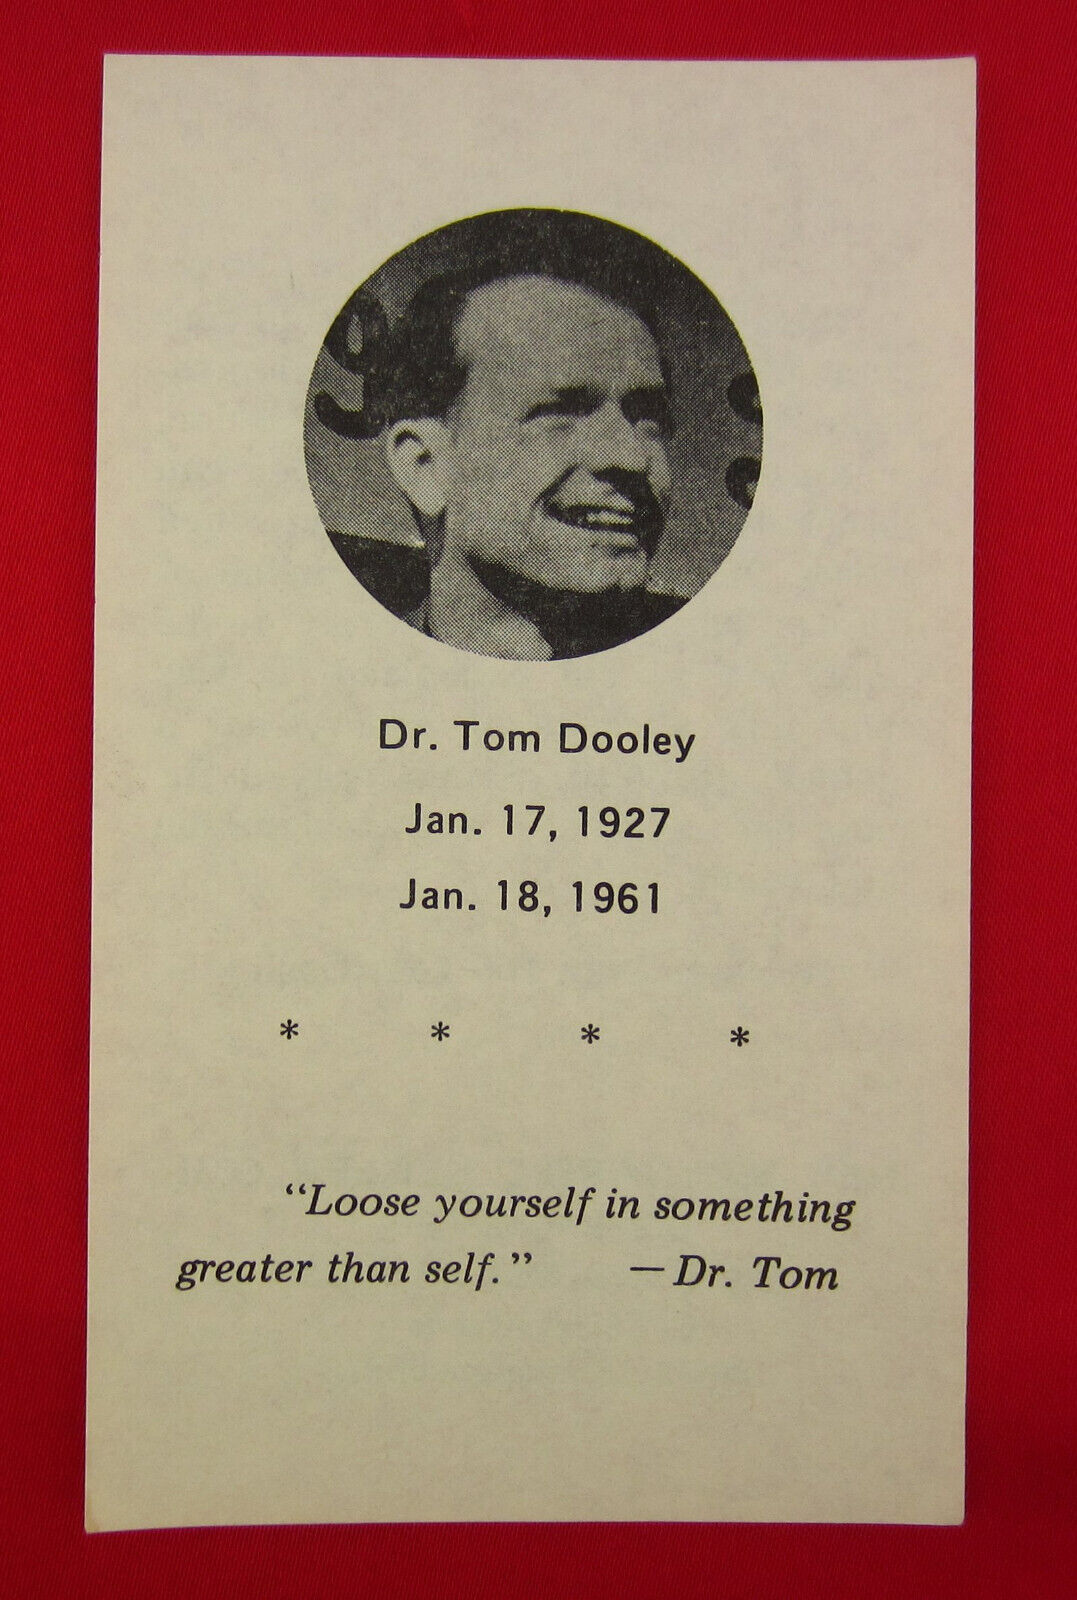 DOCTOR TOM DOOLEY Card LOSE YOURSELF IN SOMETHING GREATER THAN SELF Card